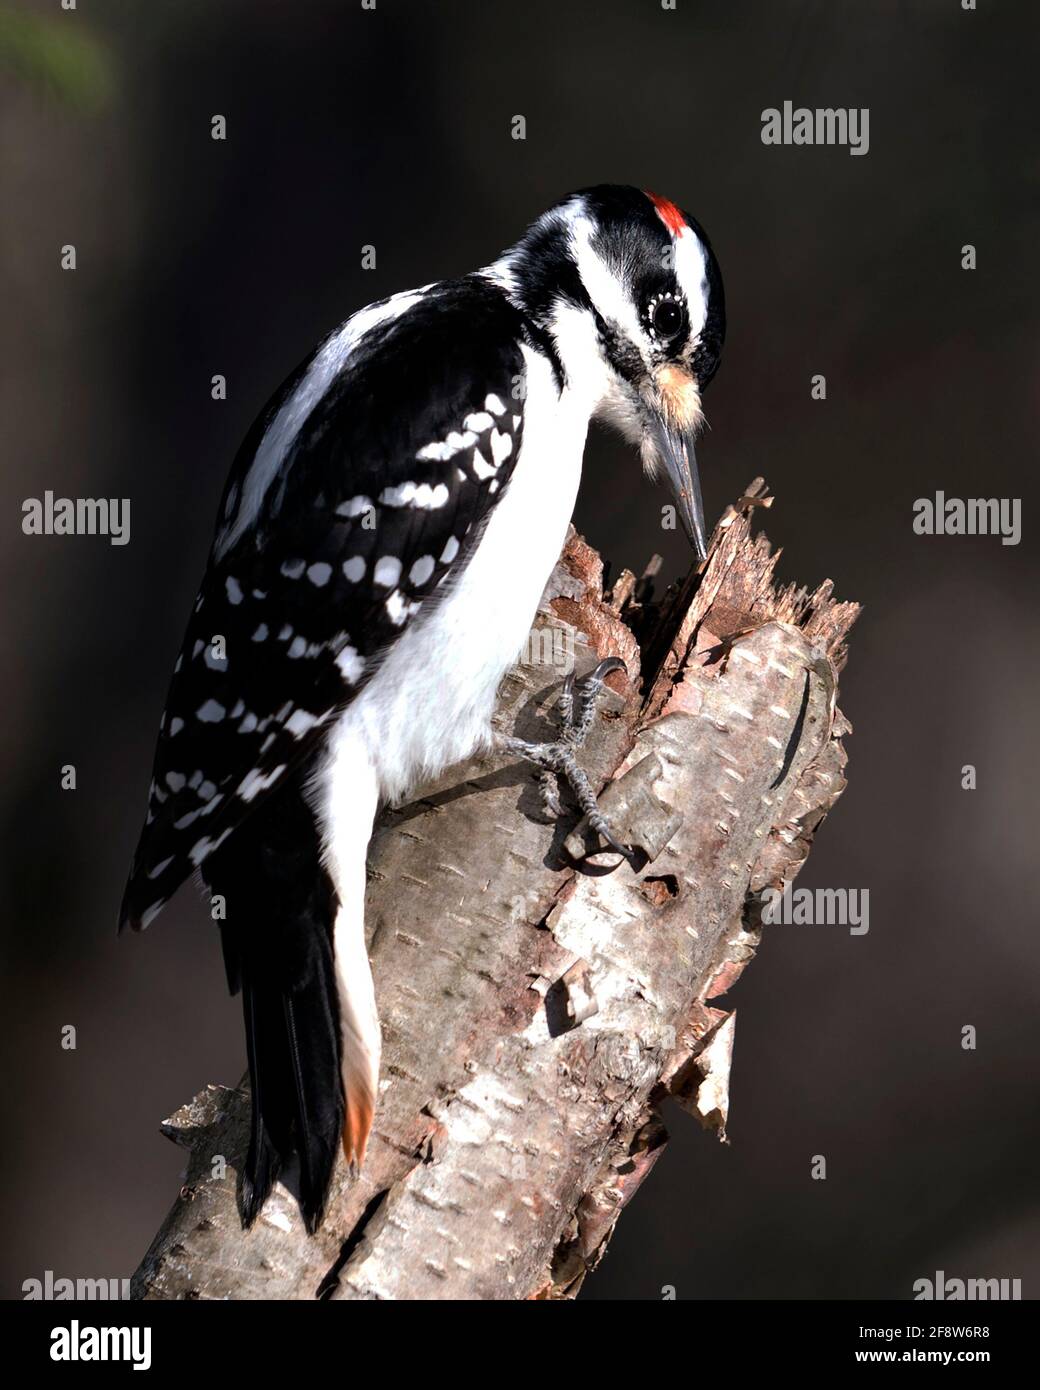 Woodpecker male close-up profile view perched on a tree stump with blur background in its environment and habitat. Image. Picture. Portrait. Stock Photo